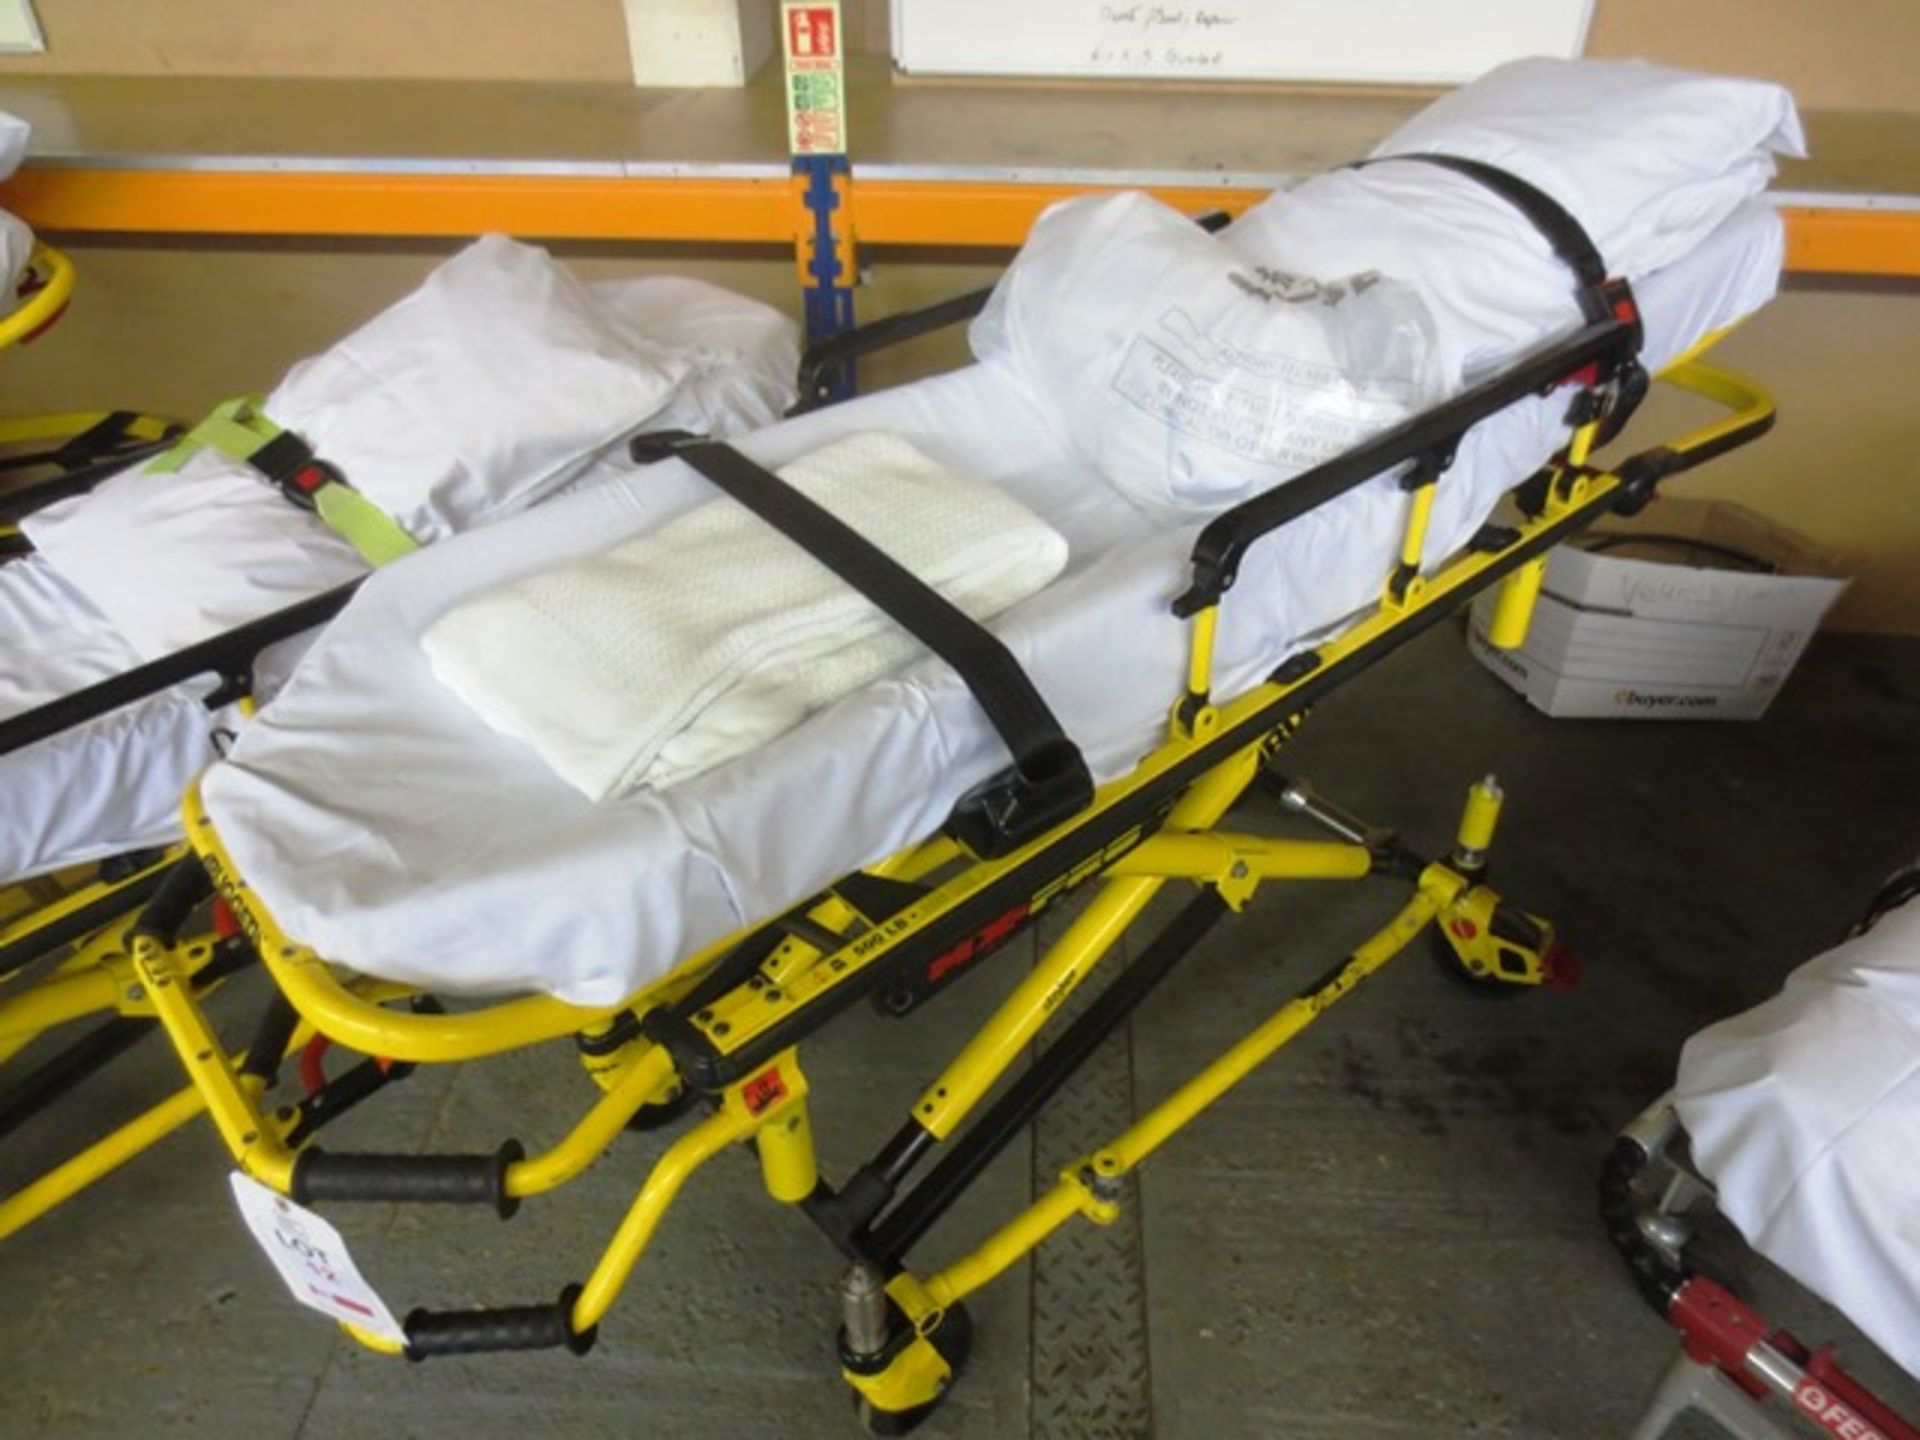 Stryker rugged MXPro mobile collapsible stretcher (228kg capacity) (Please note: NB: This item has